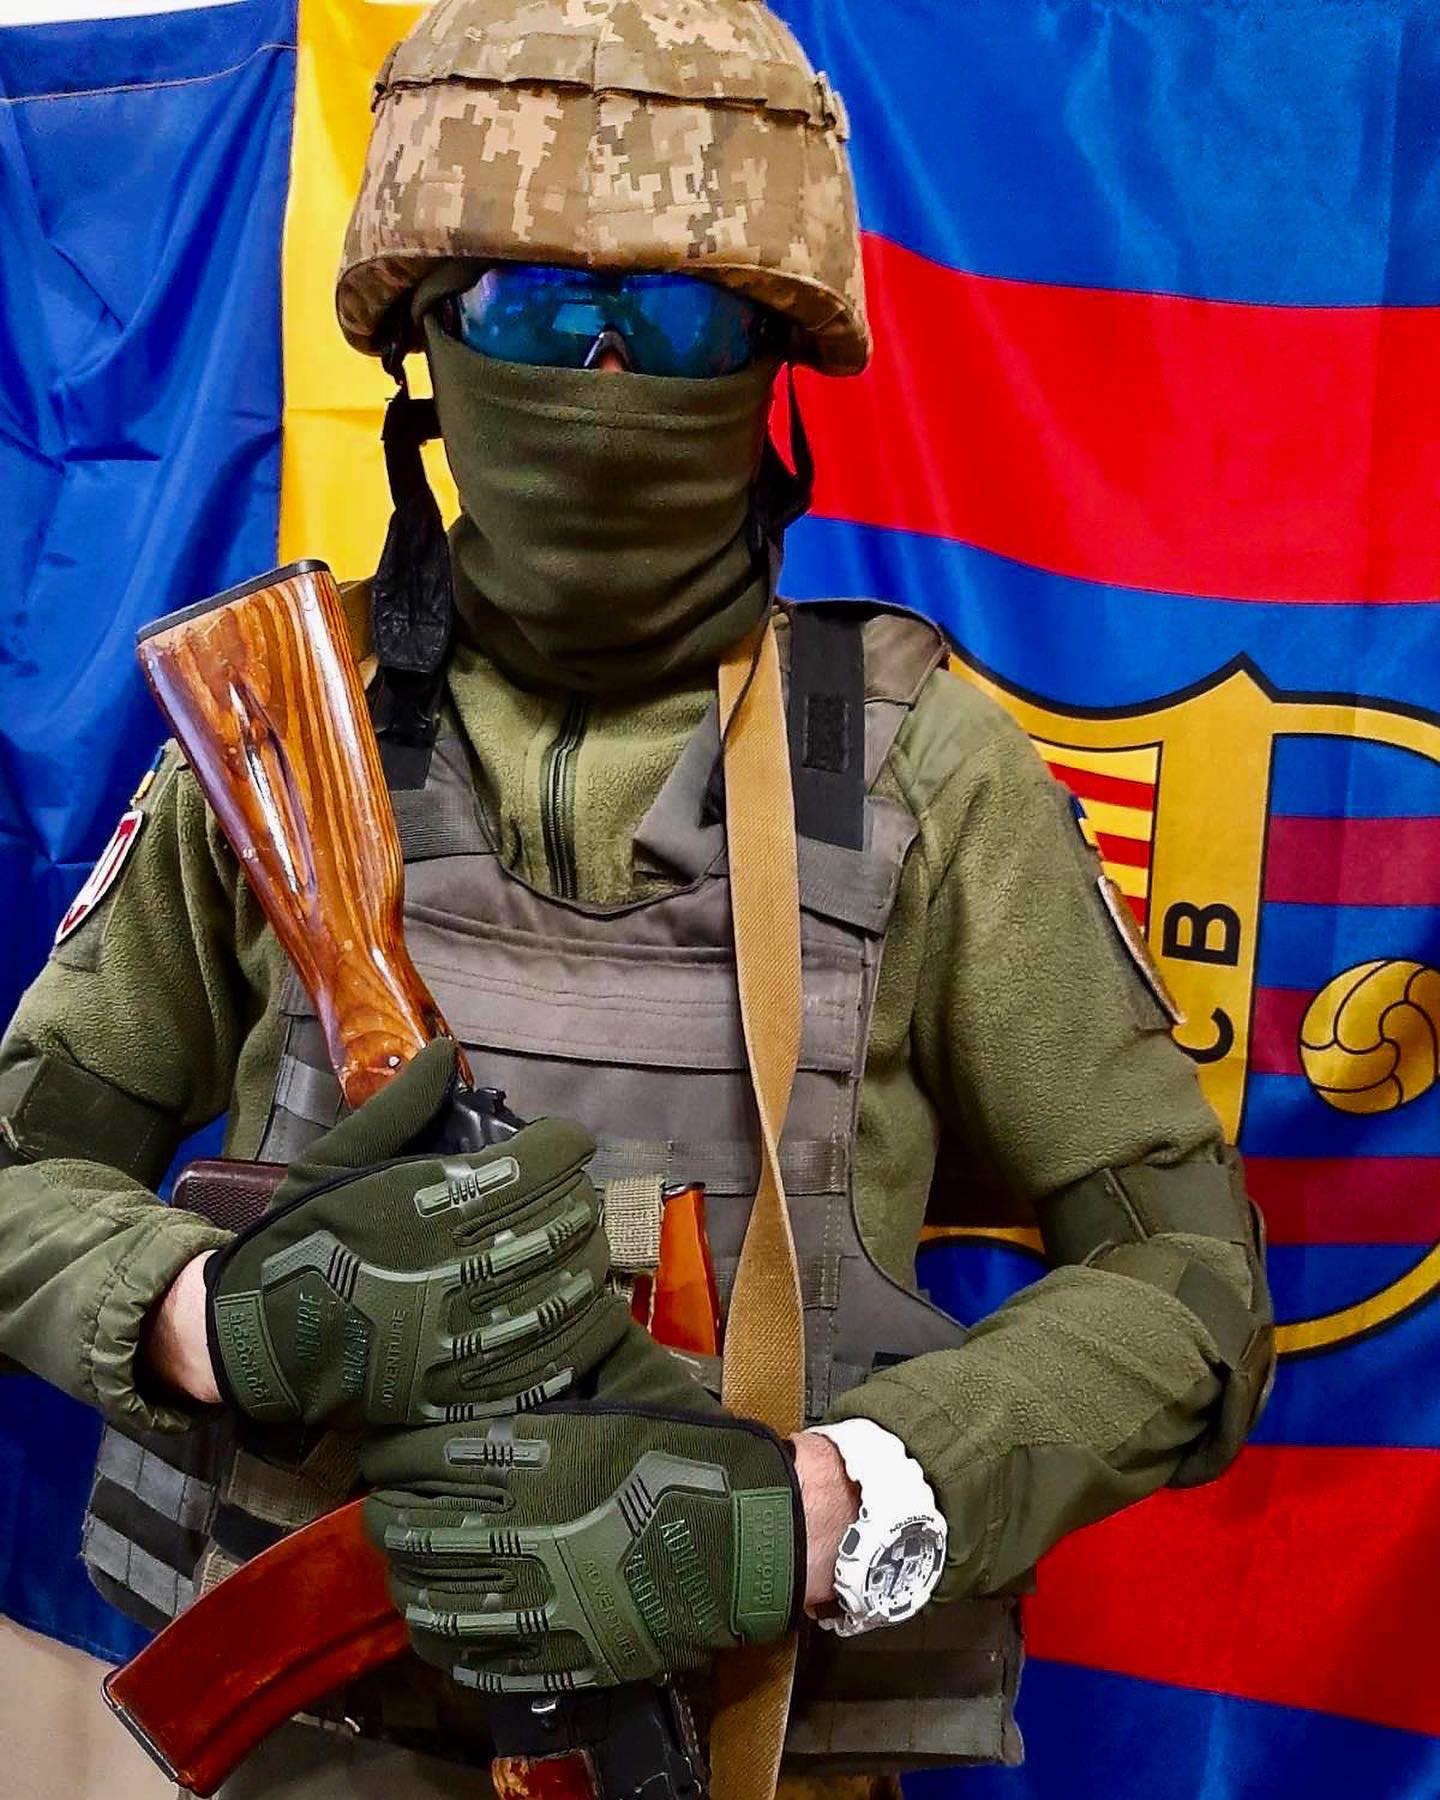 The Barça supporters' club in Kyiv, armed to defend Ukraine against Russian troops